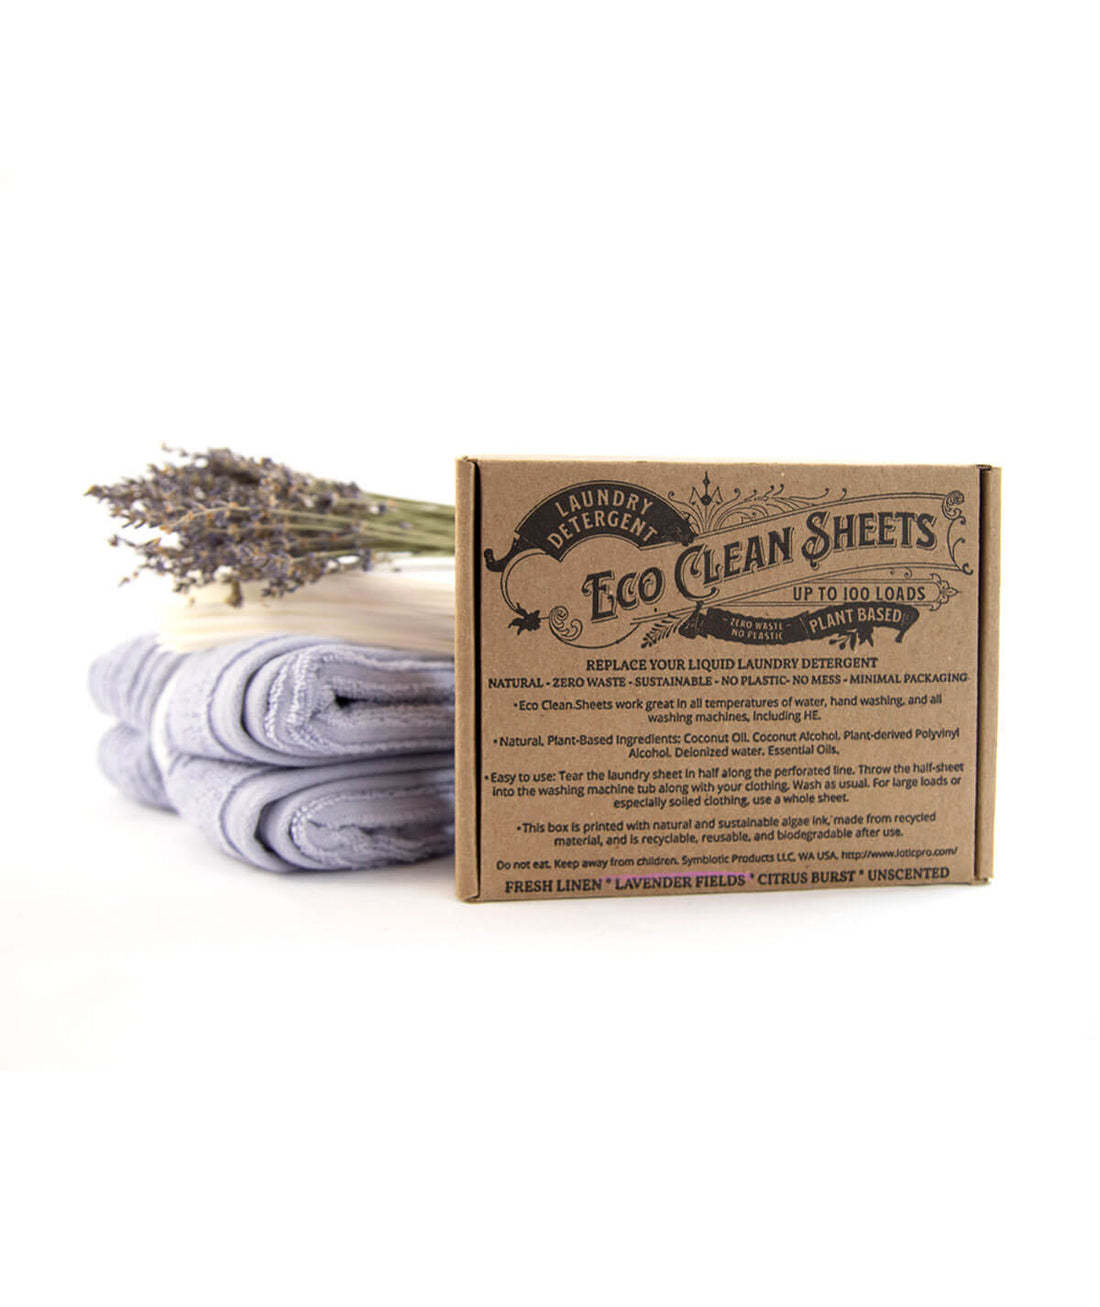 Eco Clean Sheets // Concentrated Laundry Detergent - 100 Loads // Lavender Fields